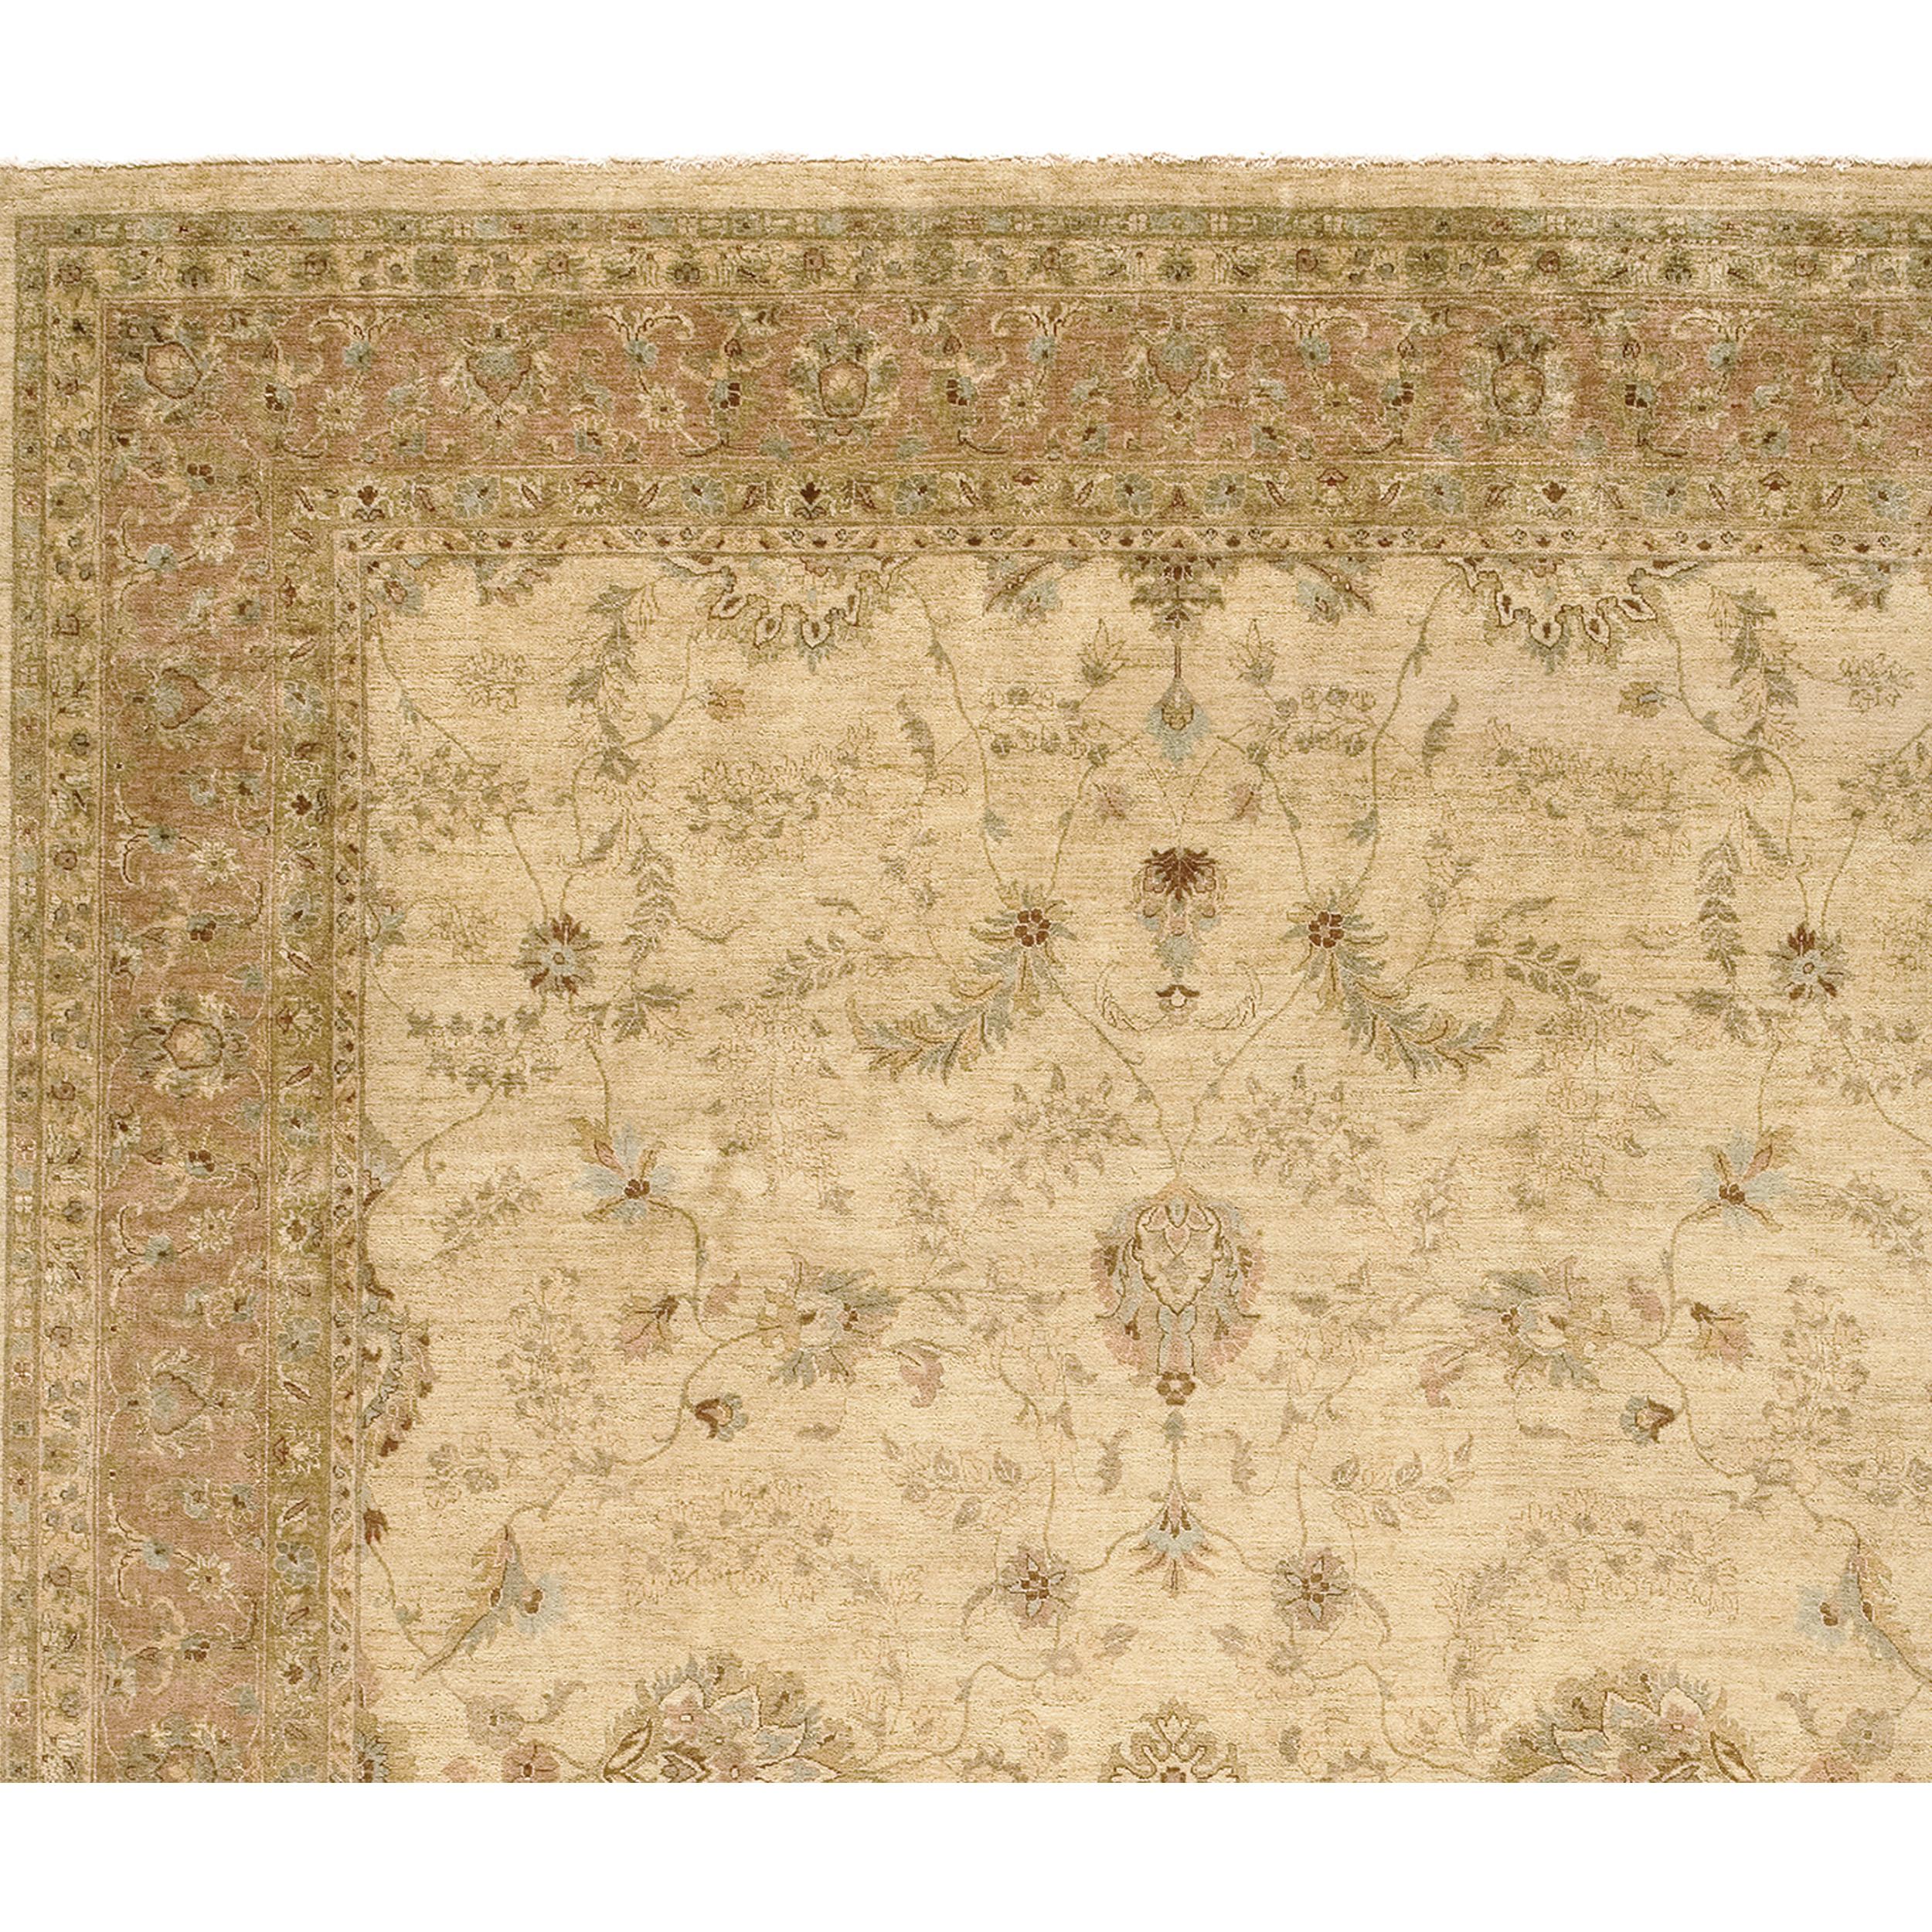 Luxury Traditional Hand-Knotted Lilihan Cream and Melon 12x18 Rug In New Condition For Sale In Secaucus, NJ